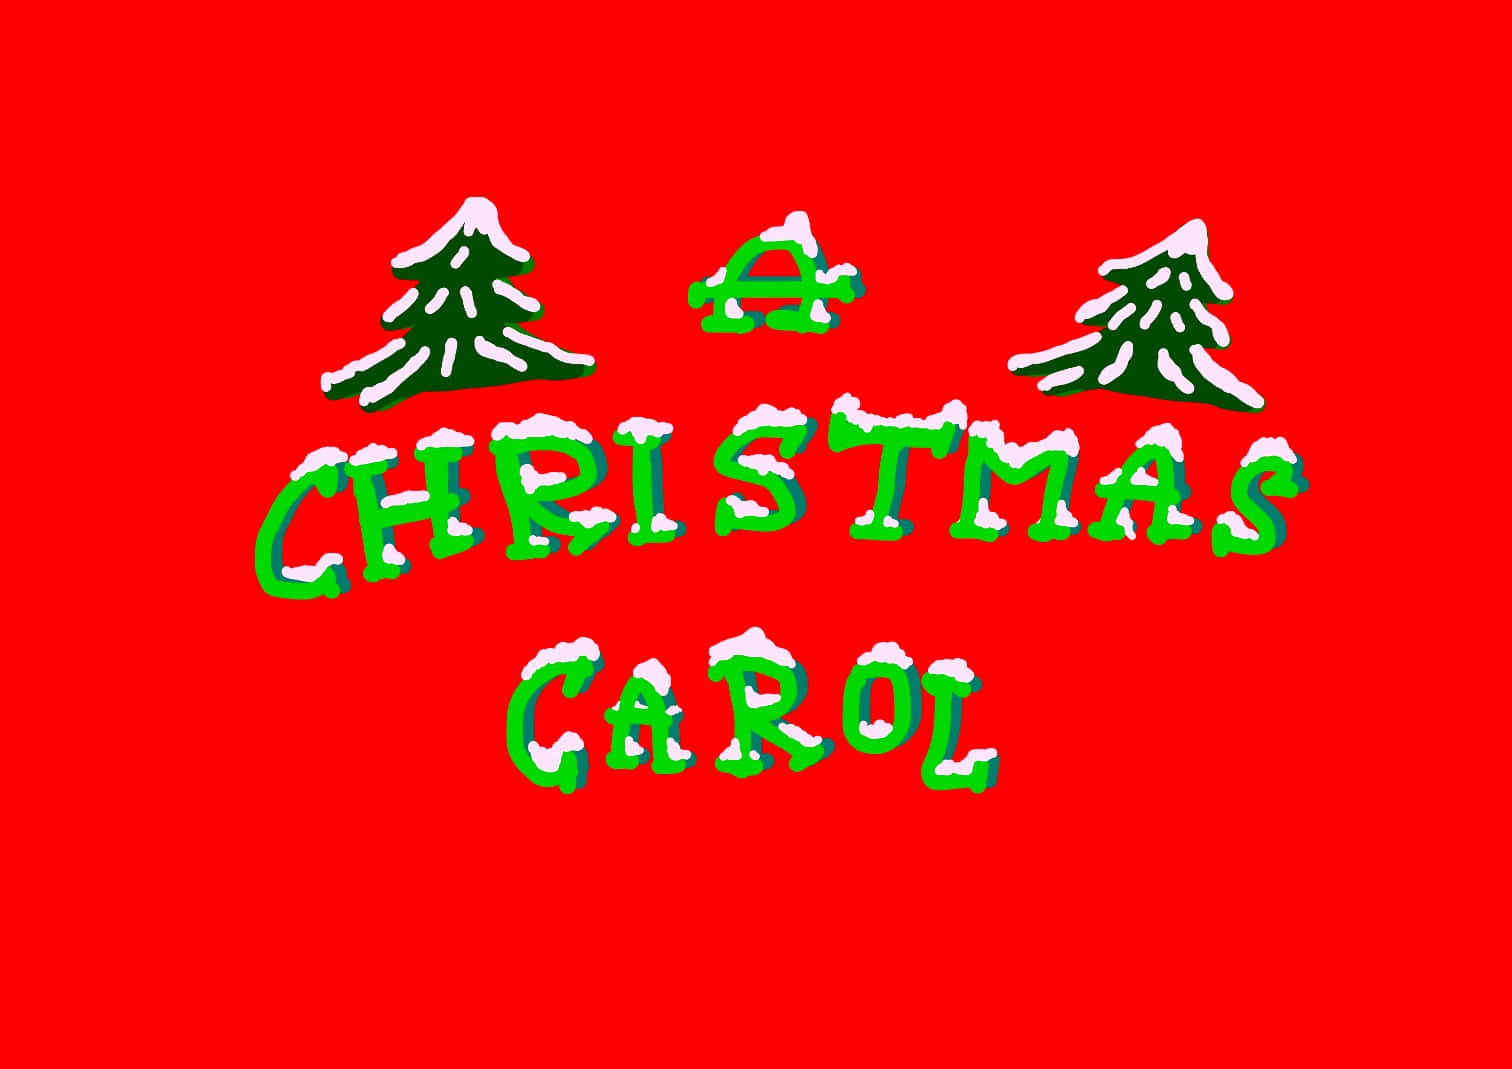 A Red Background With The Words Christmas Carol